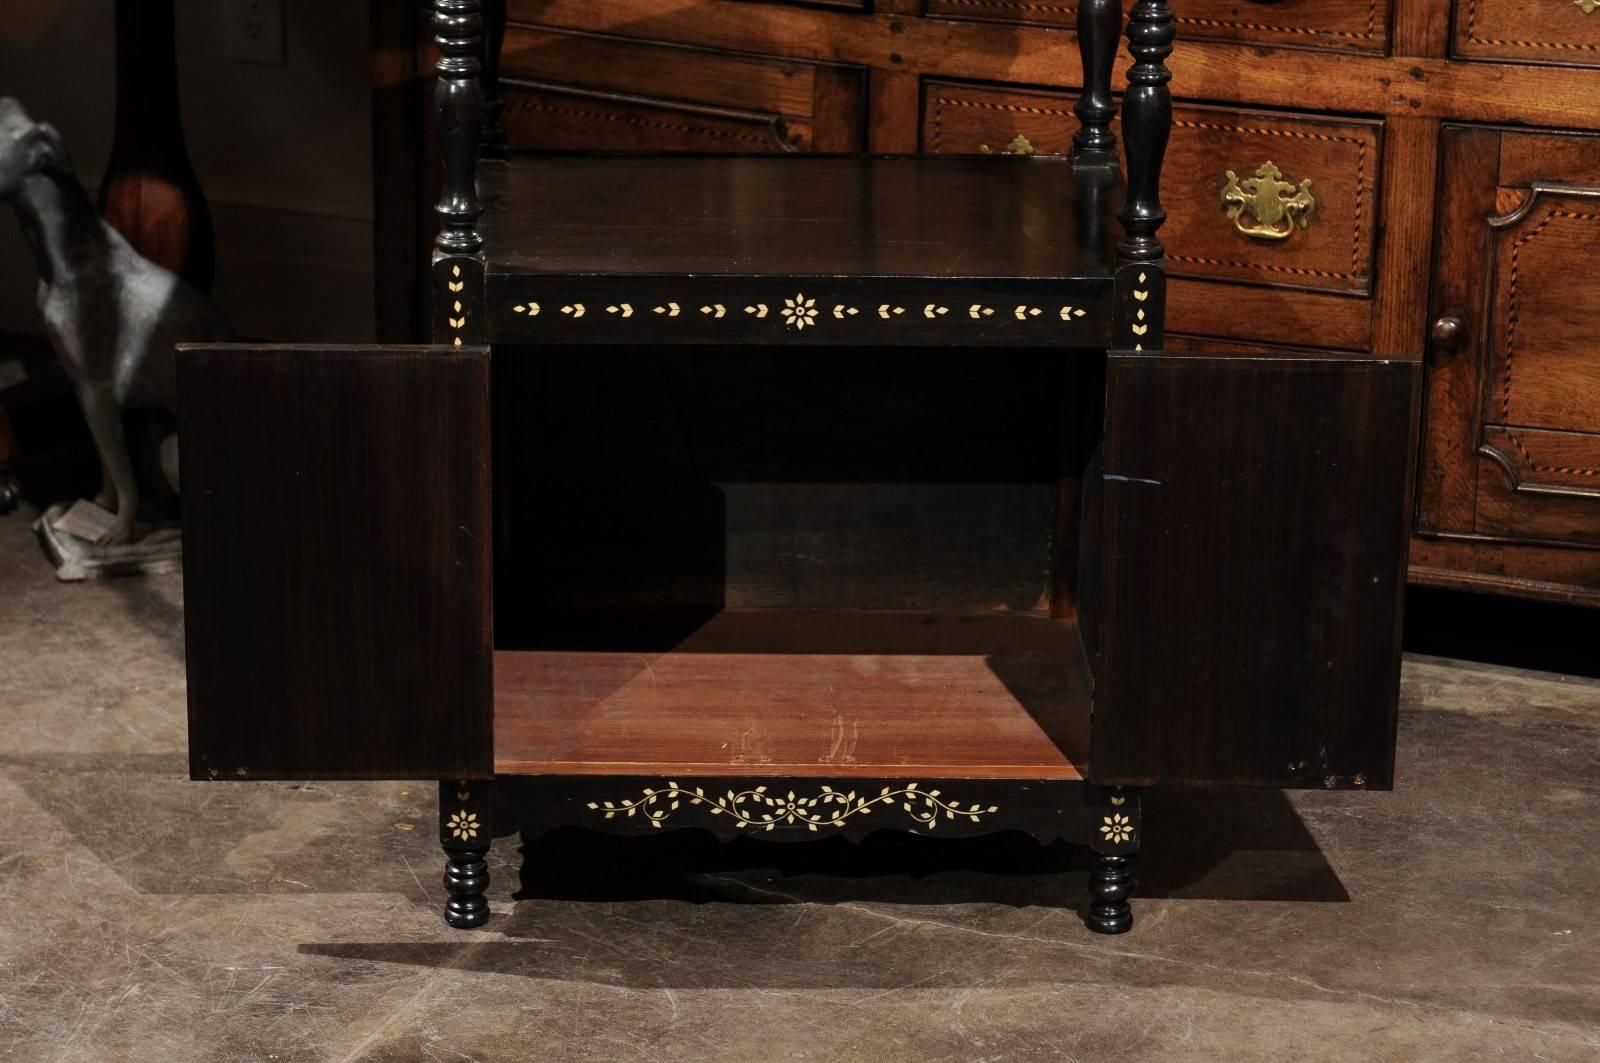 Ebonized Wood Etagère with Floral Bone Inlay Decor from the Early 19th Century 2